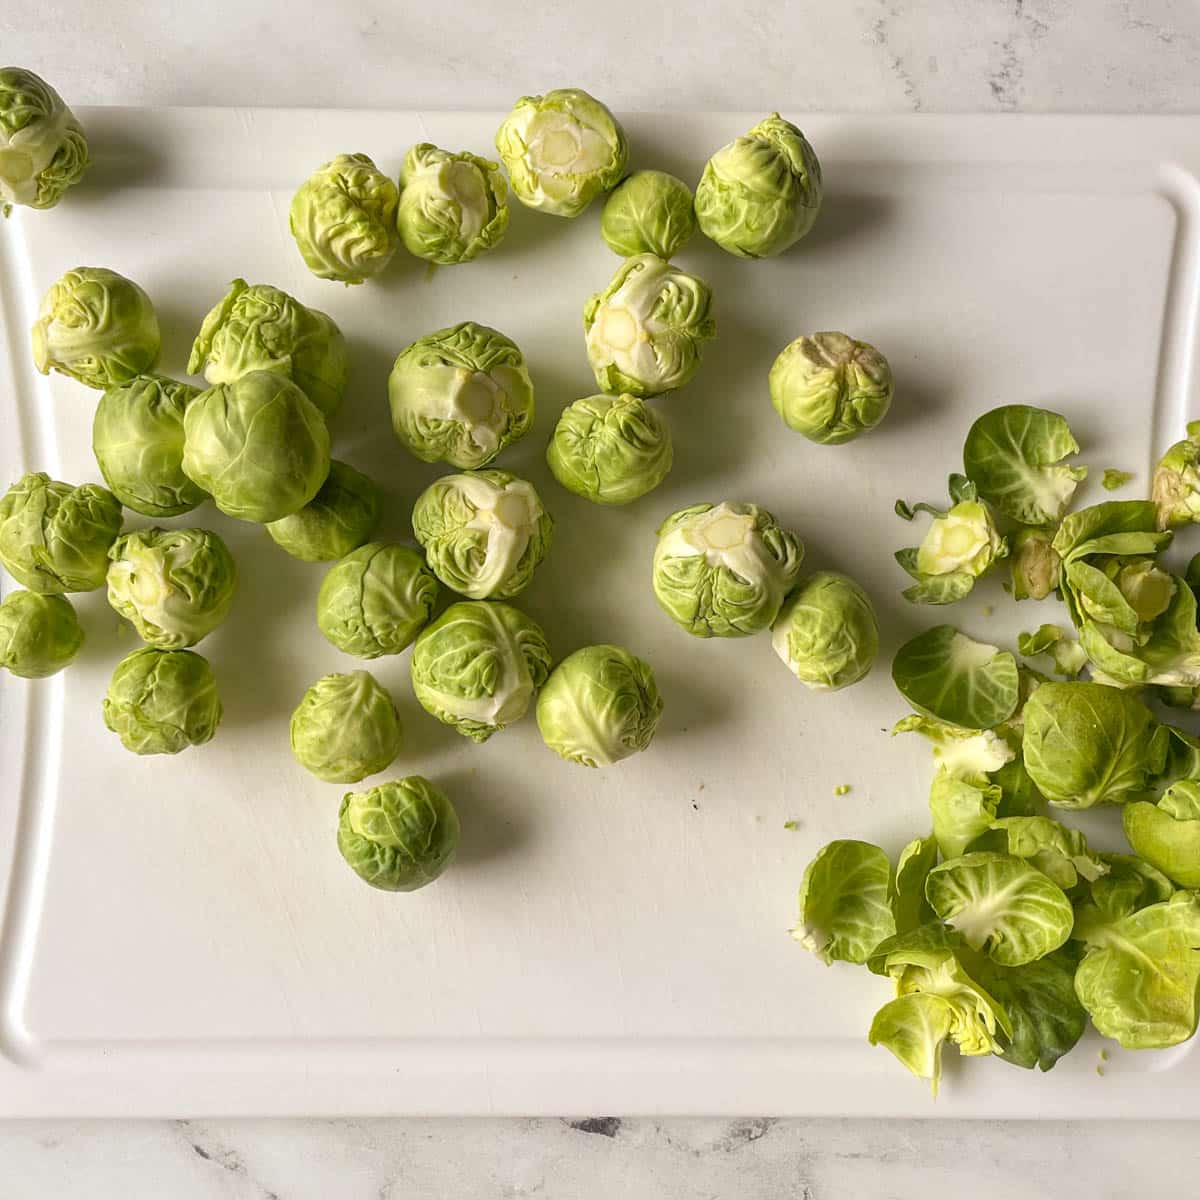 Trimmed brussels sprouts sit on a white cutting board.